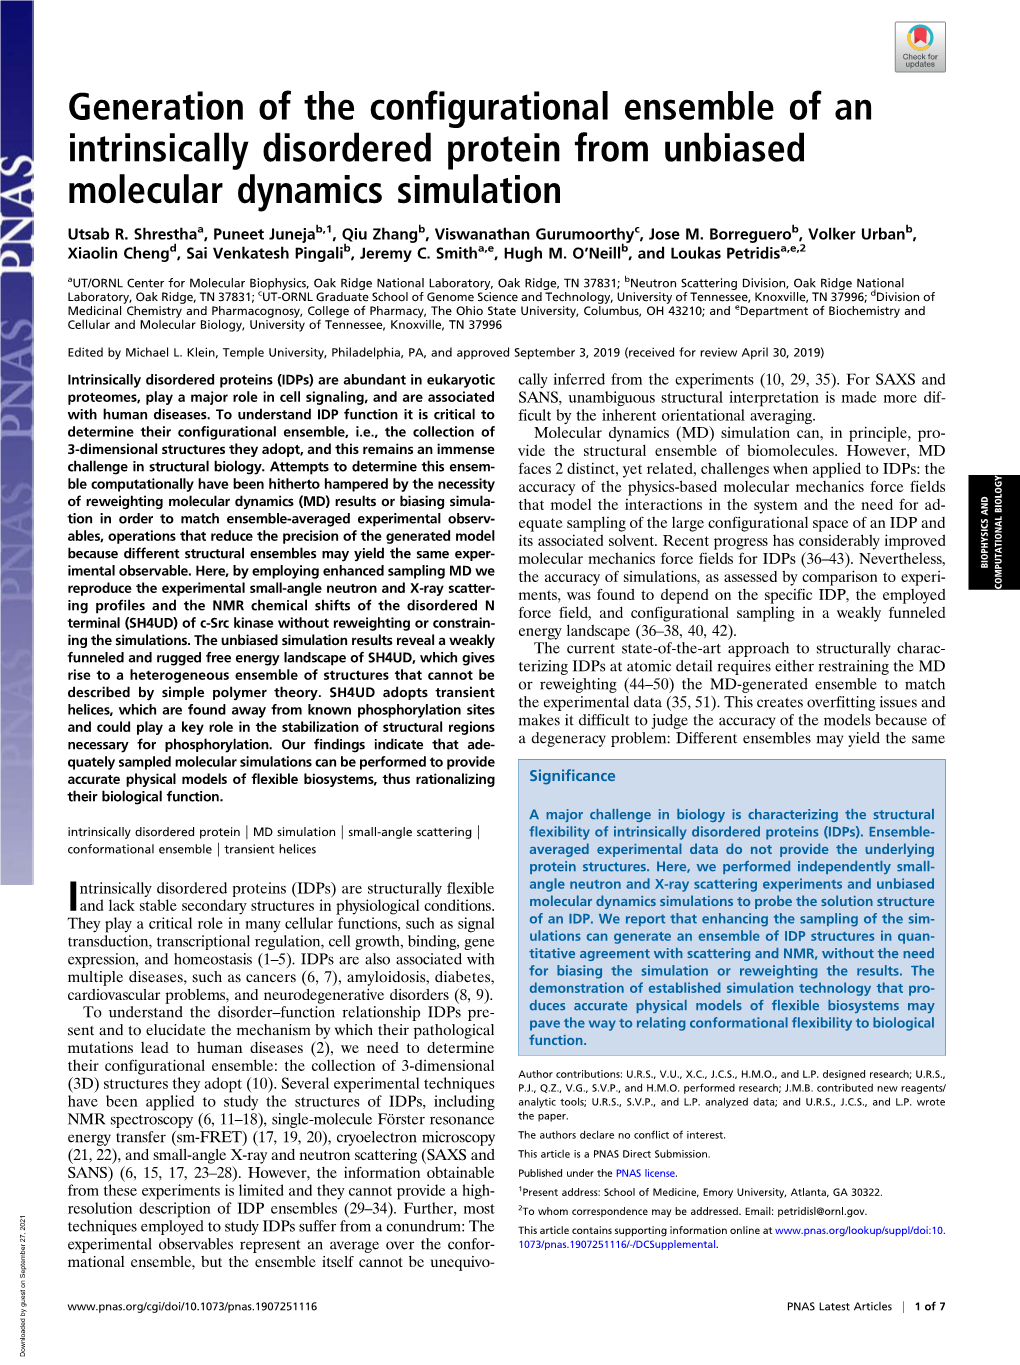 Generation of the Configurational Ensemble of an Intrinsically Disordered Protein from Unbiased Molecular Dynamics Simulation